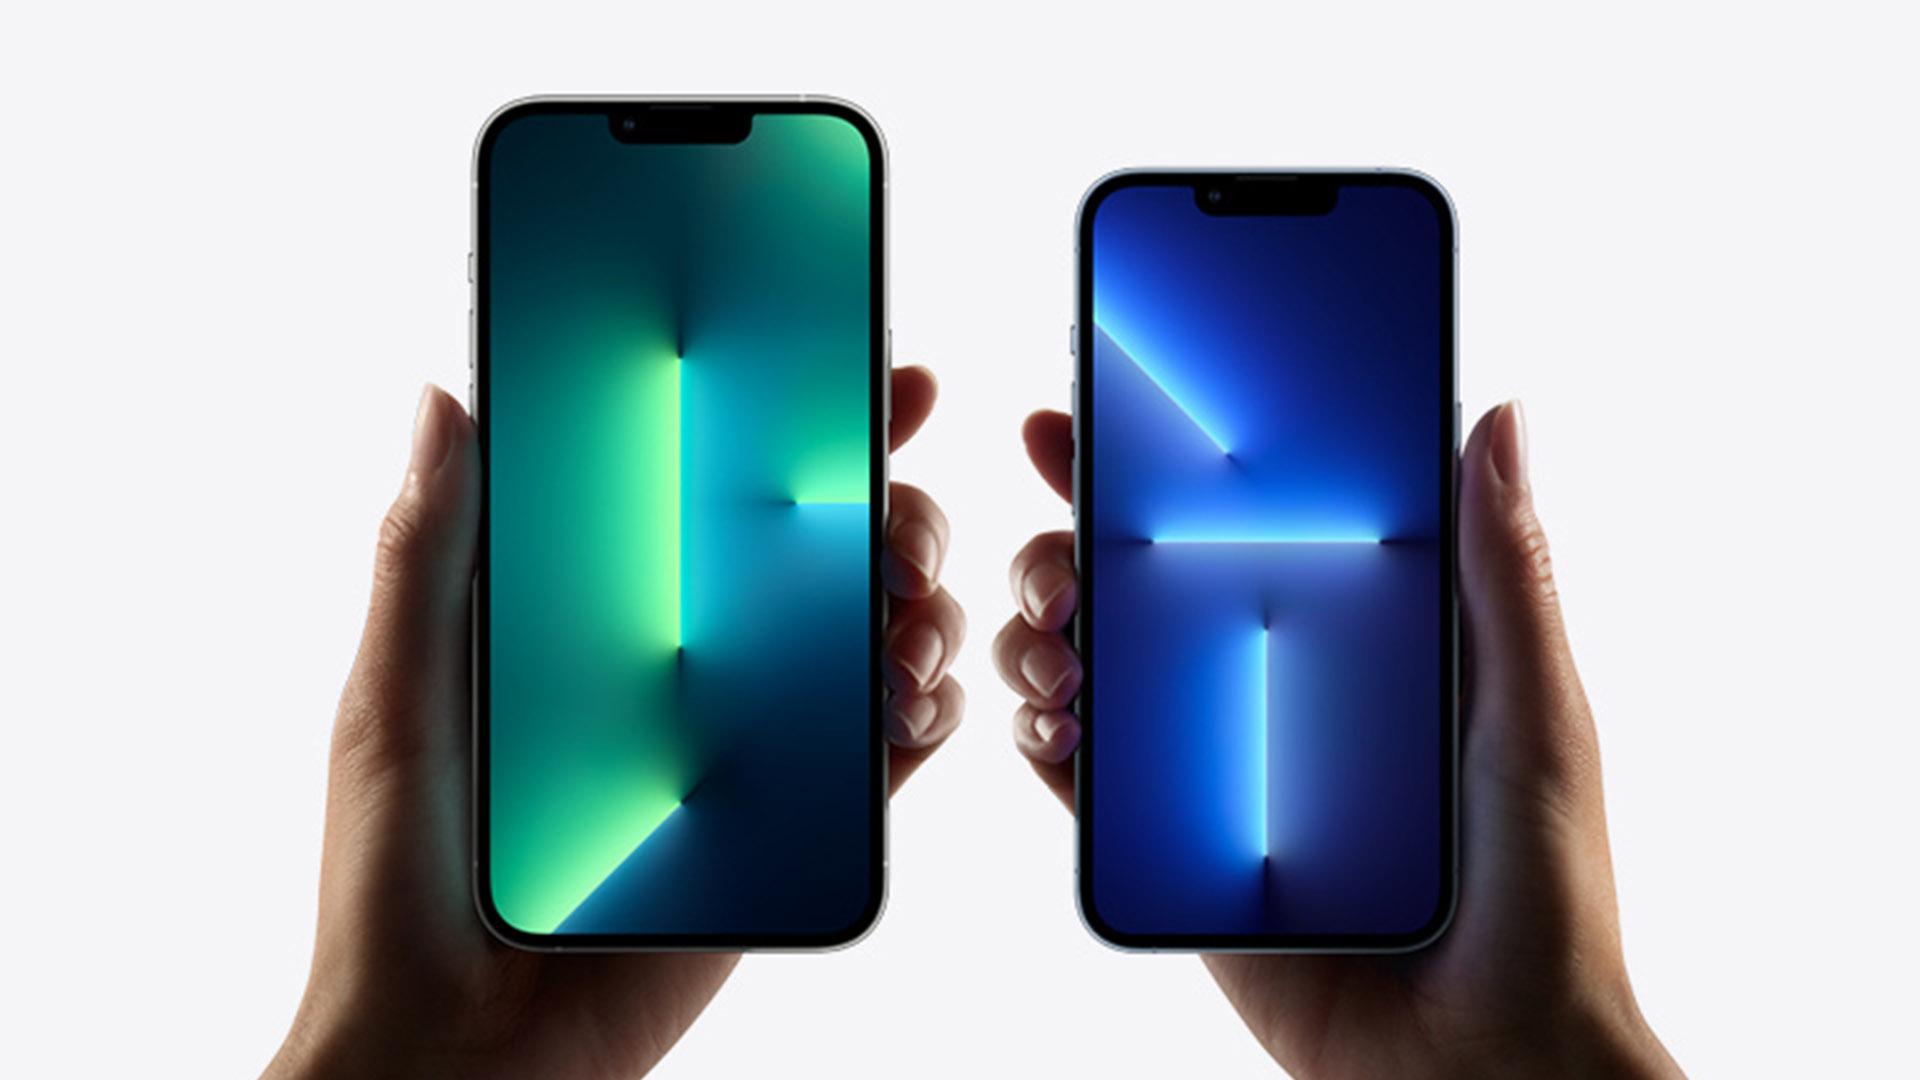 iPhone 13 Pro and iPhone 13 Pro Max.  (Source: Apple / Reproduction)